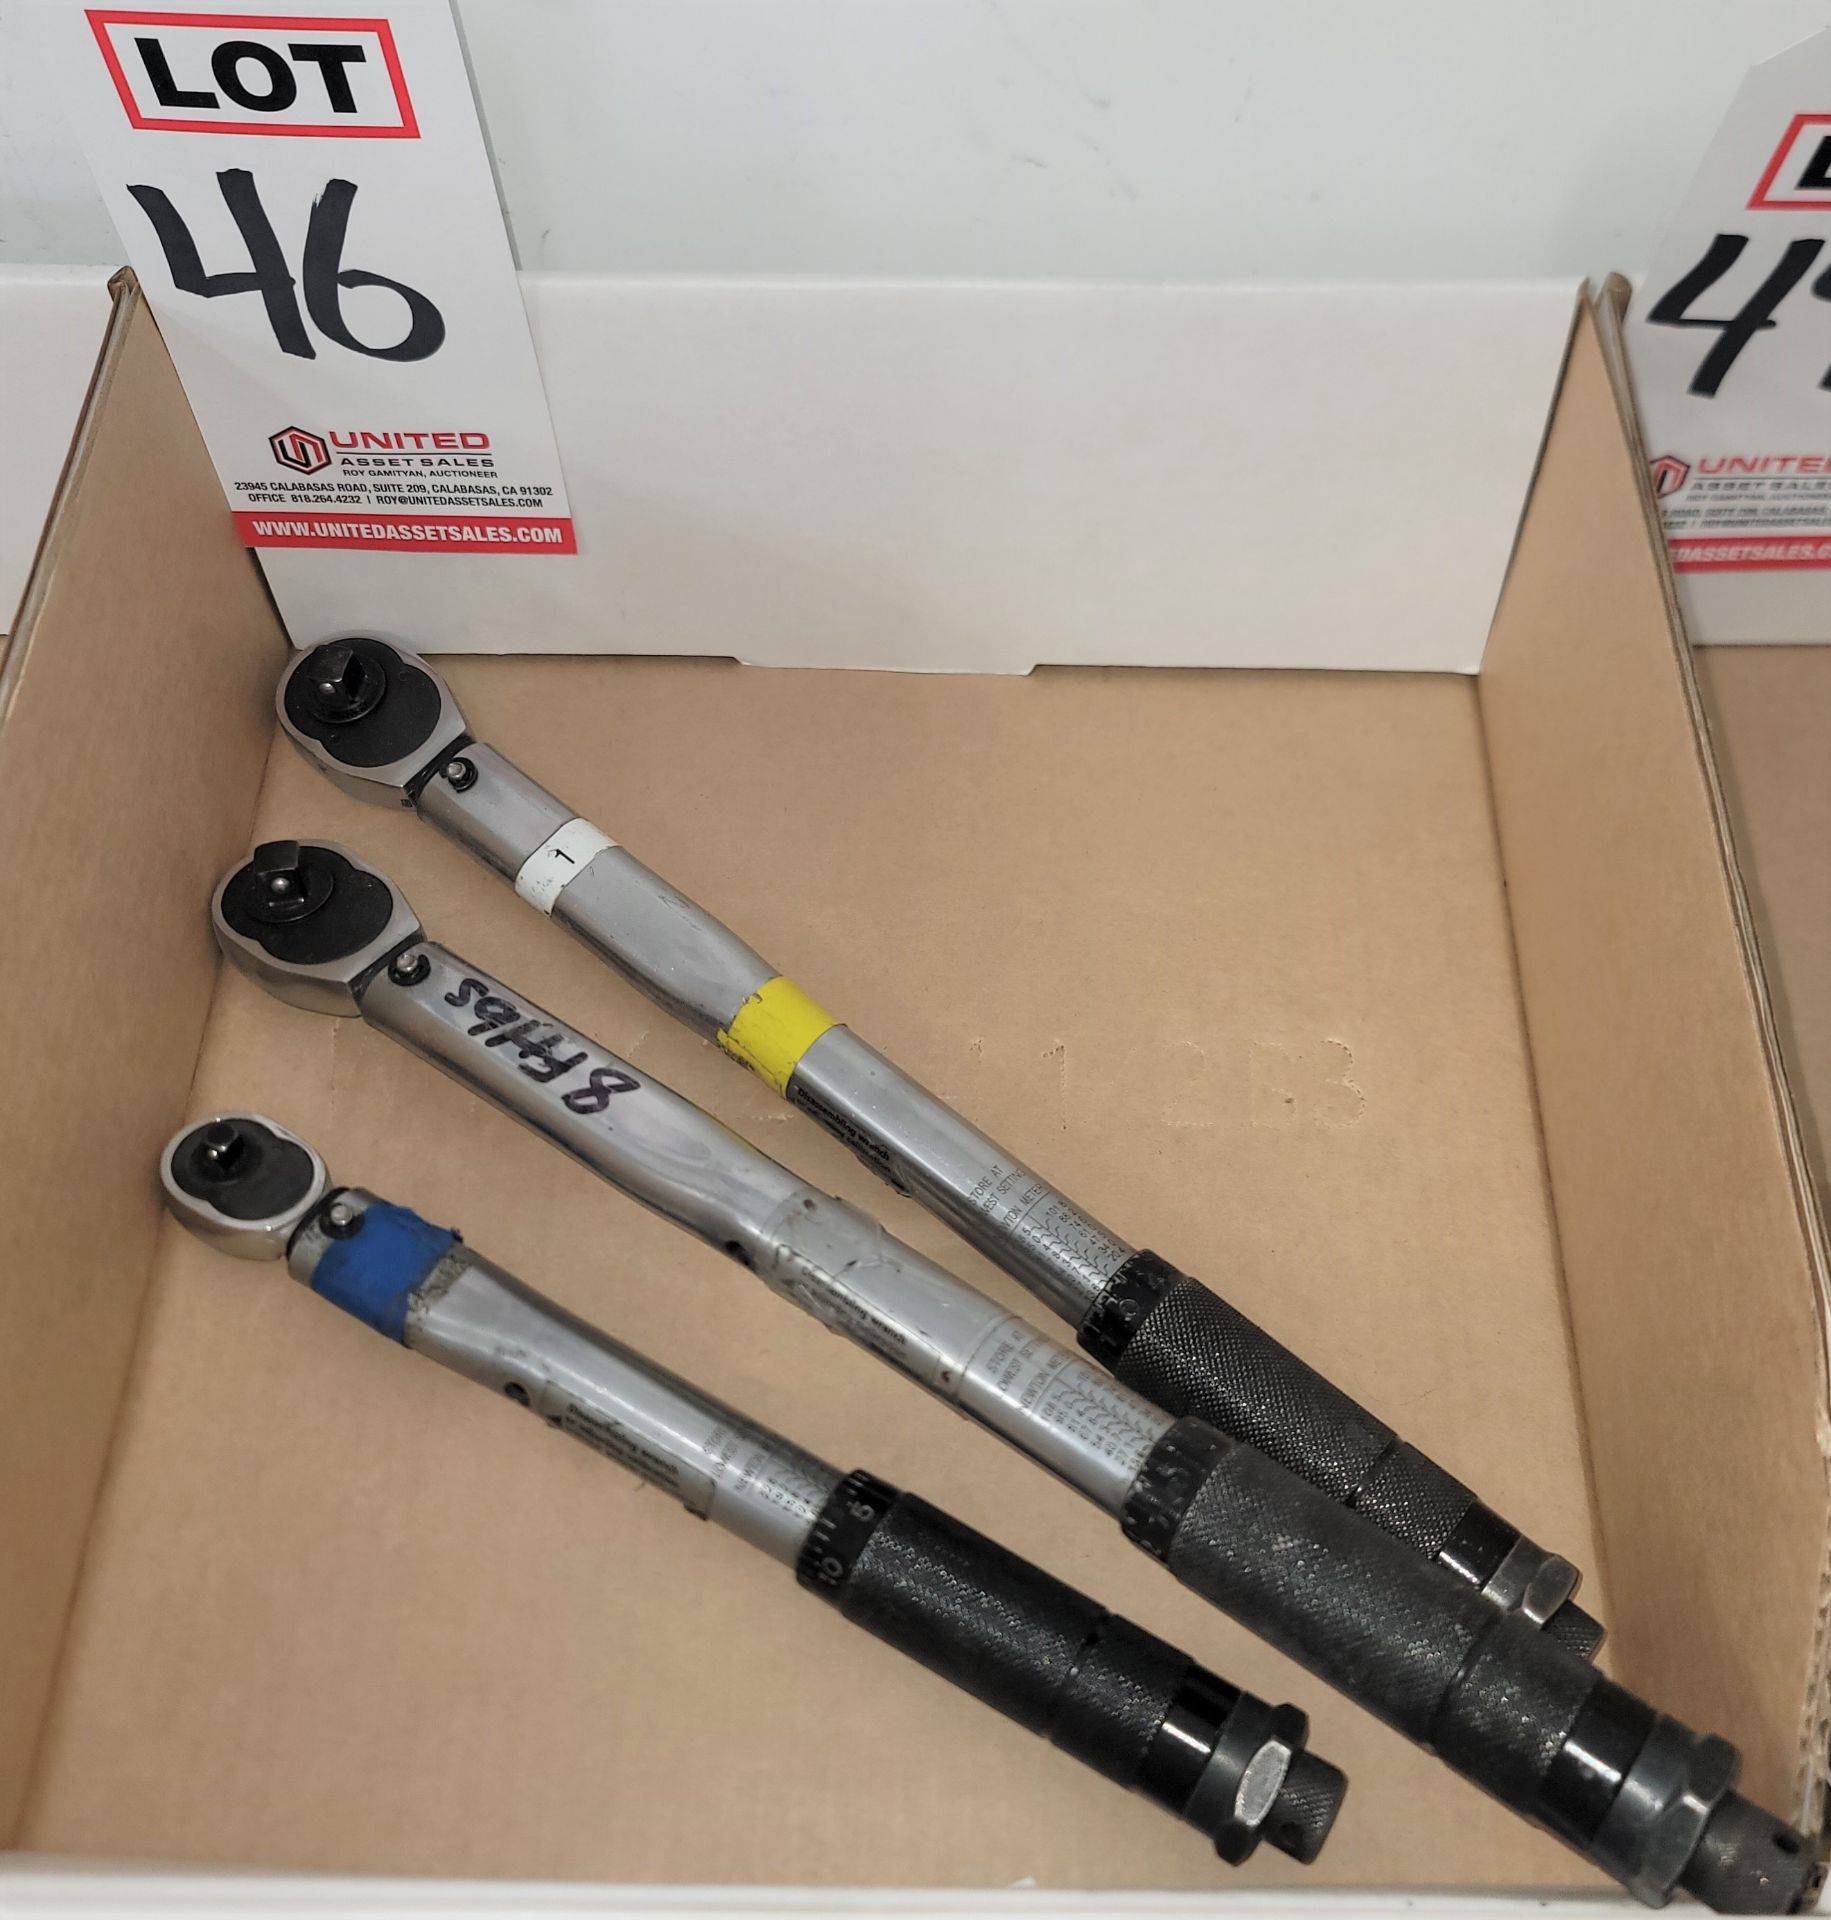 LOT - (2) 3/8" DRIVE TORQUE WRENCHES, (1) 1/4" DRIVE TORQUE WRENCH, TEKTON BRAND